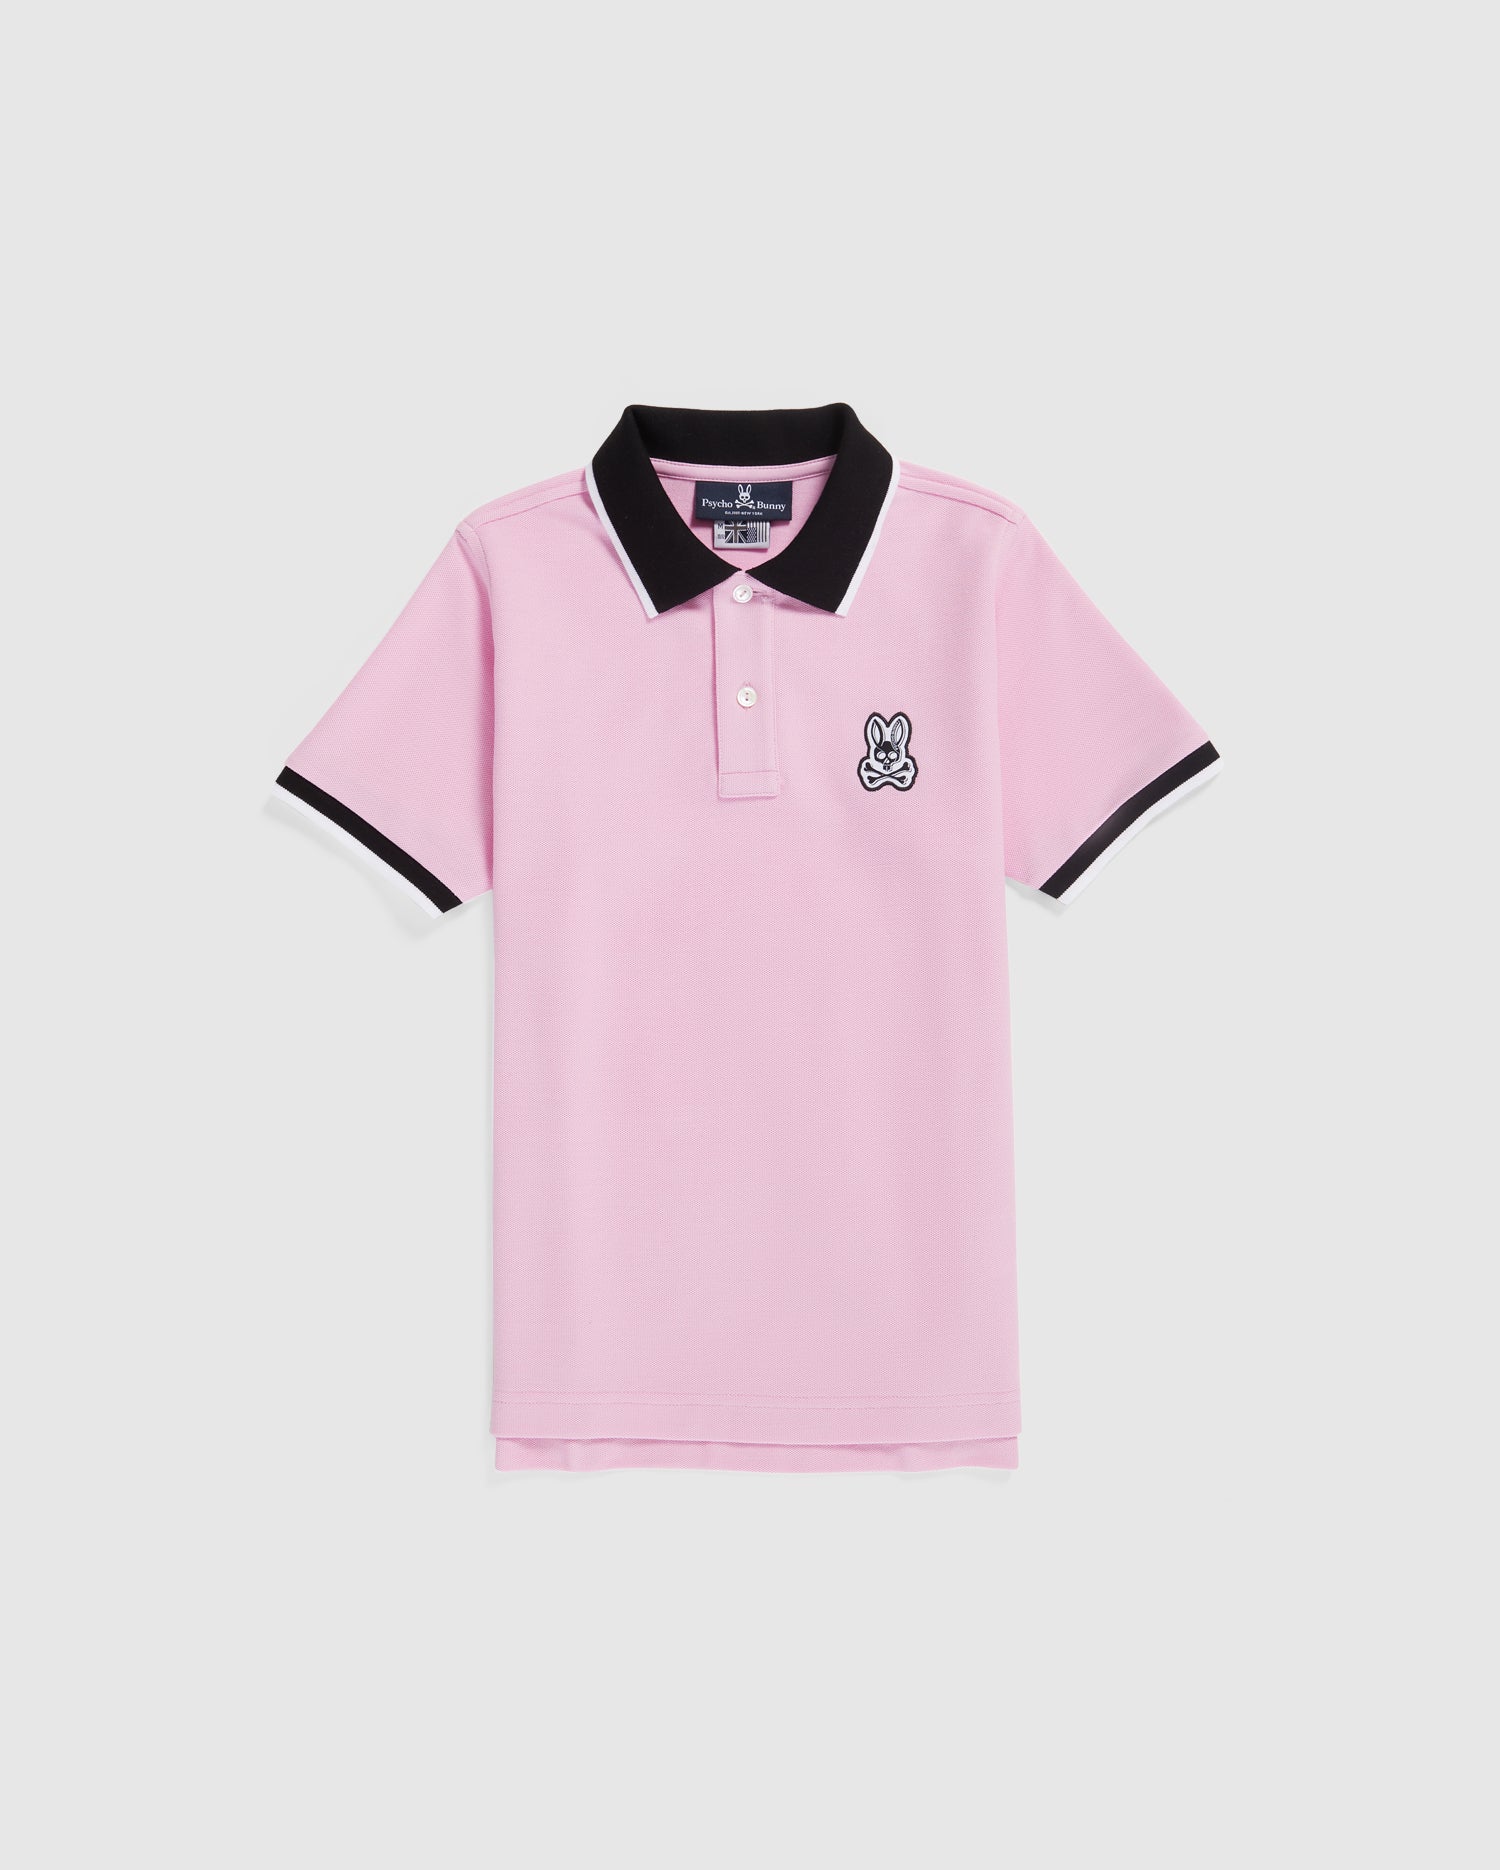 Shop Kids' Serge Pique Fashion Polo in Pure Pink | Psycho Bunny